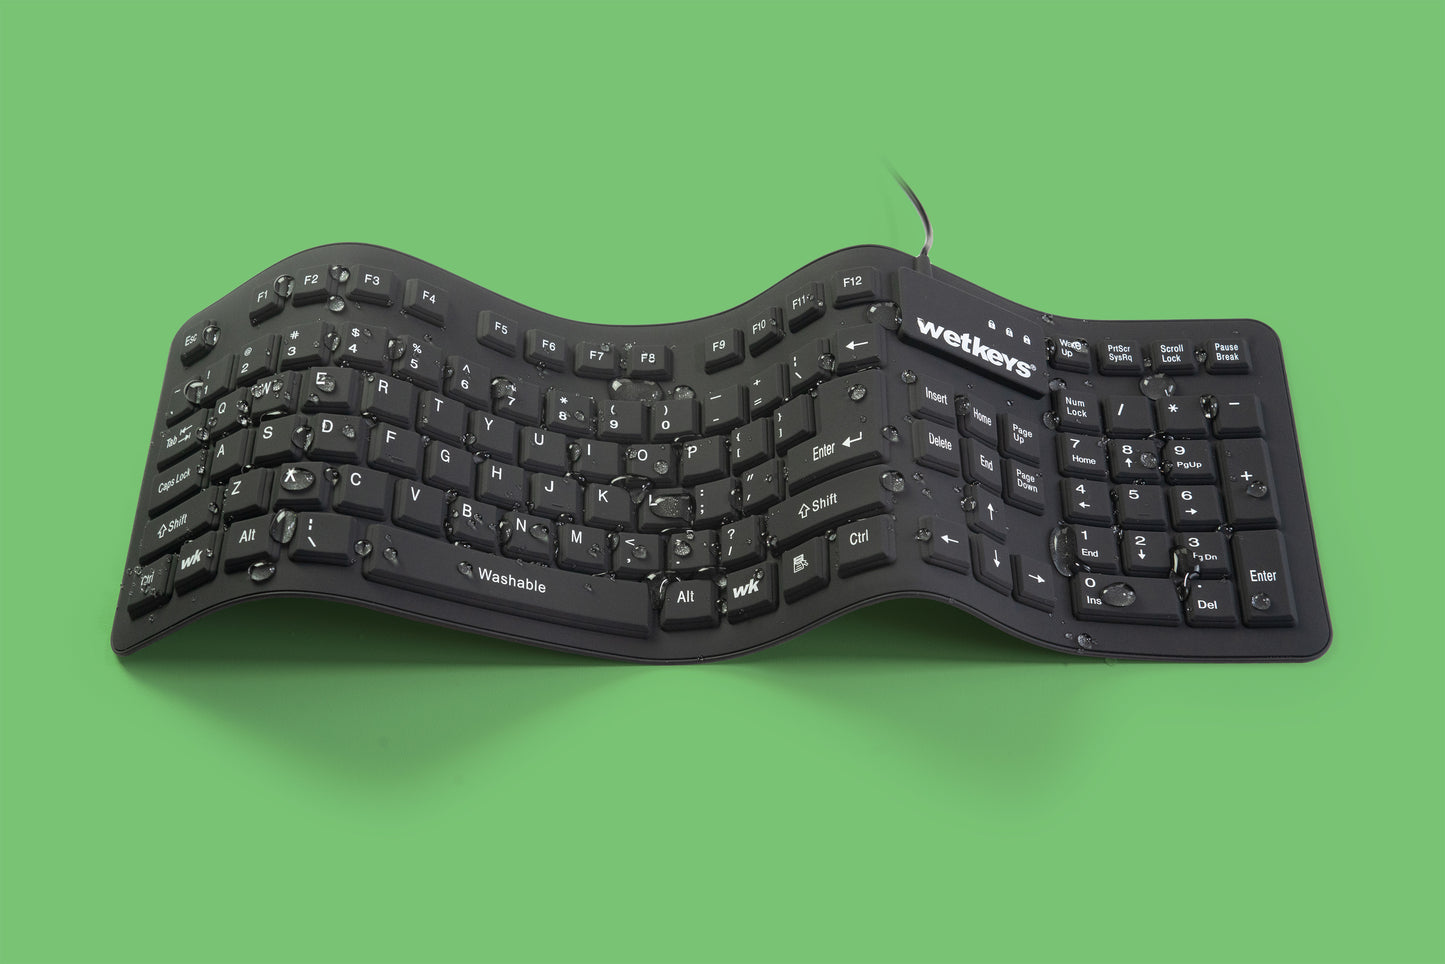 The "Soft-touch Comfort" Keyboard